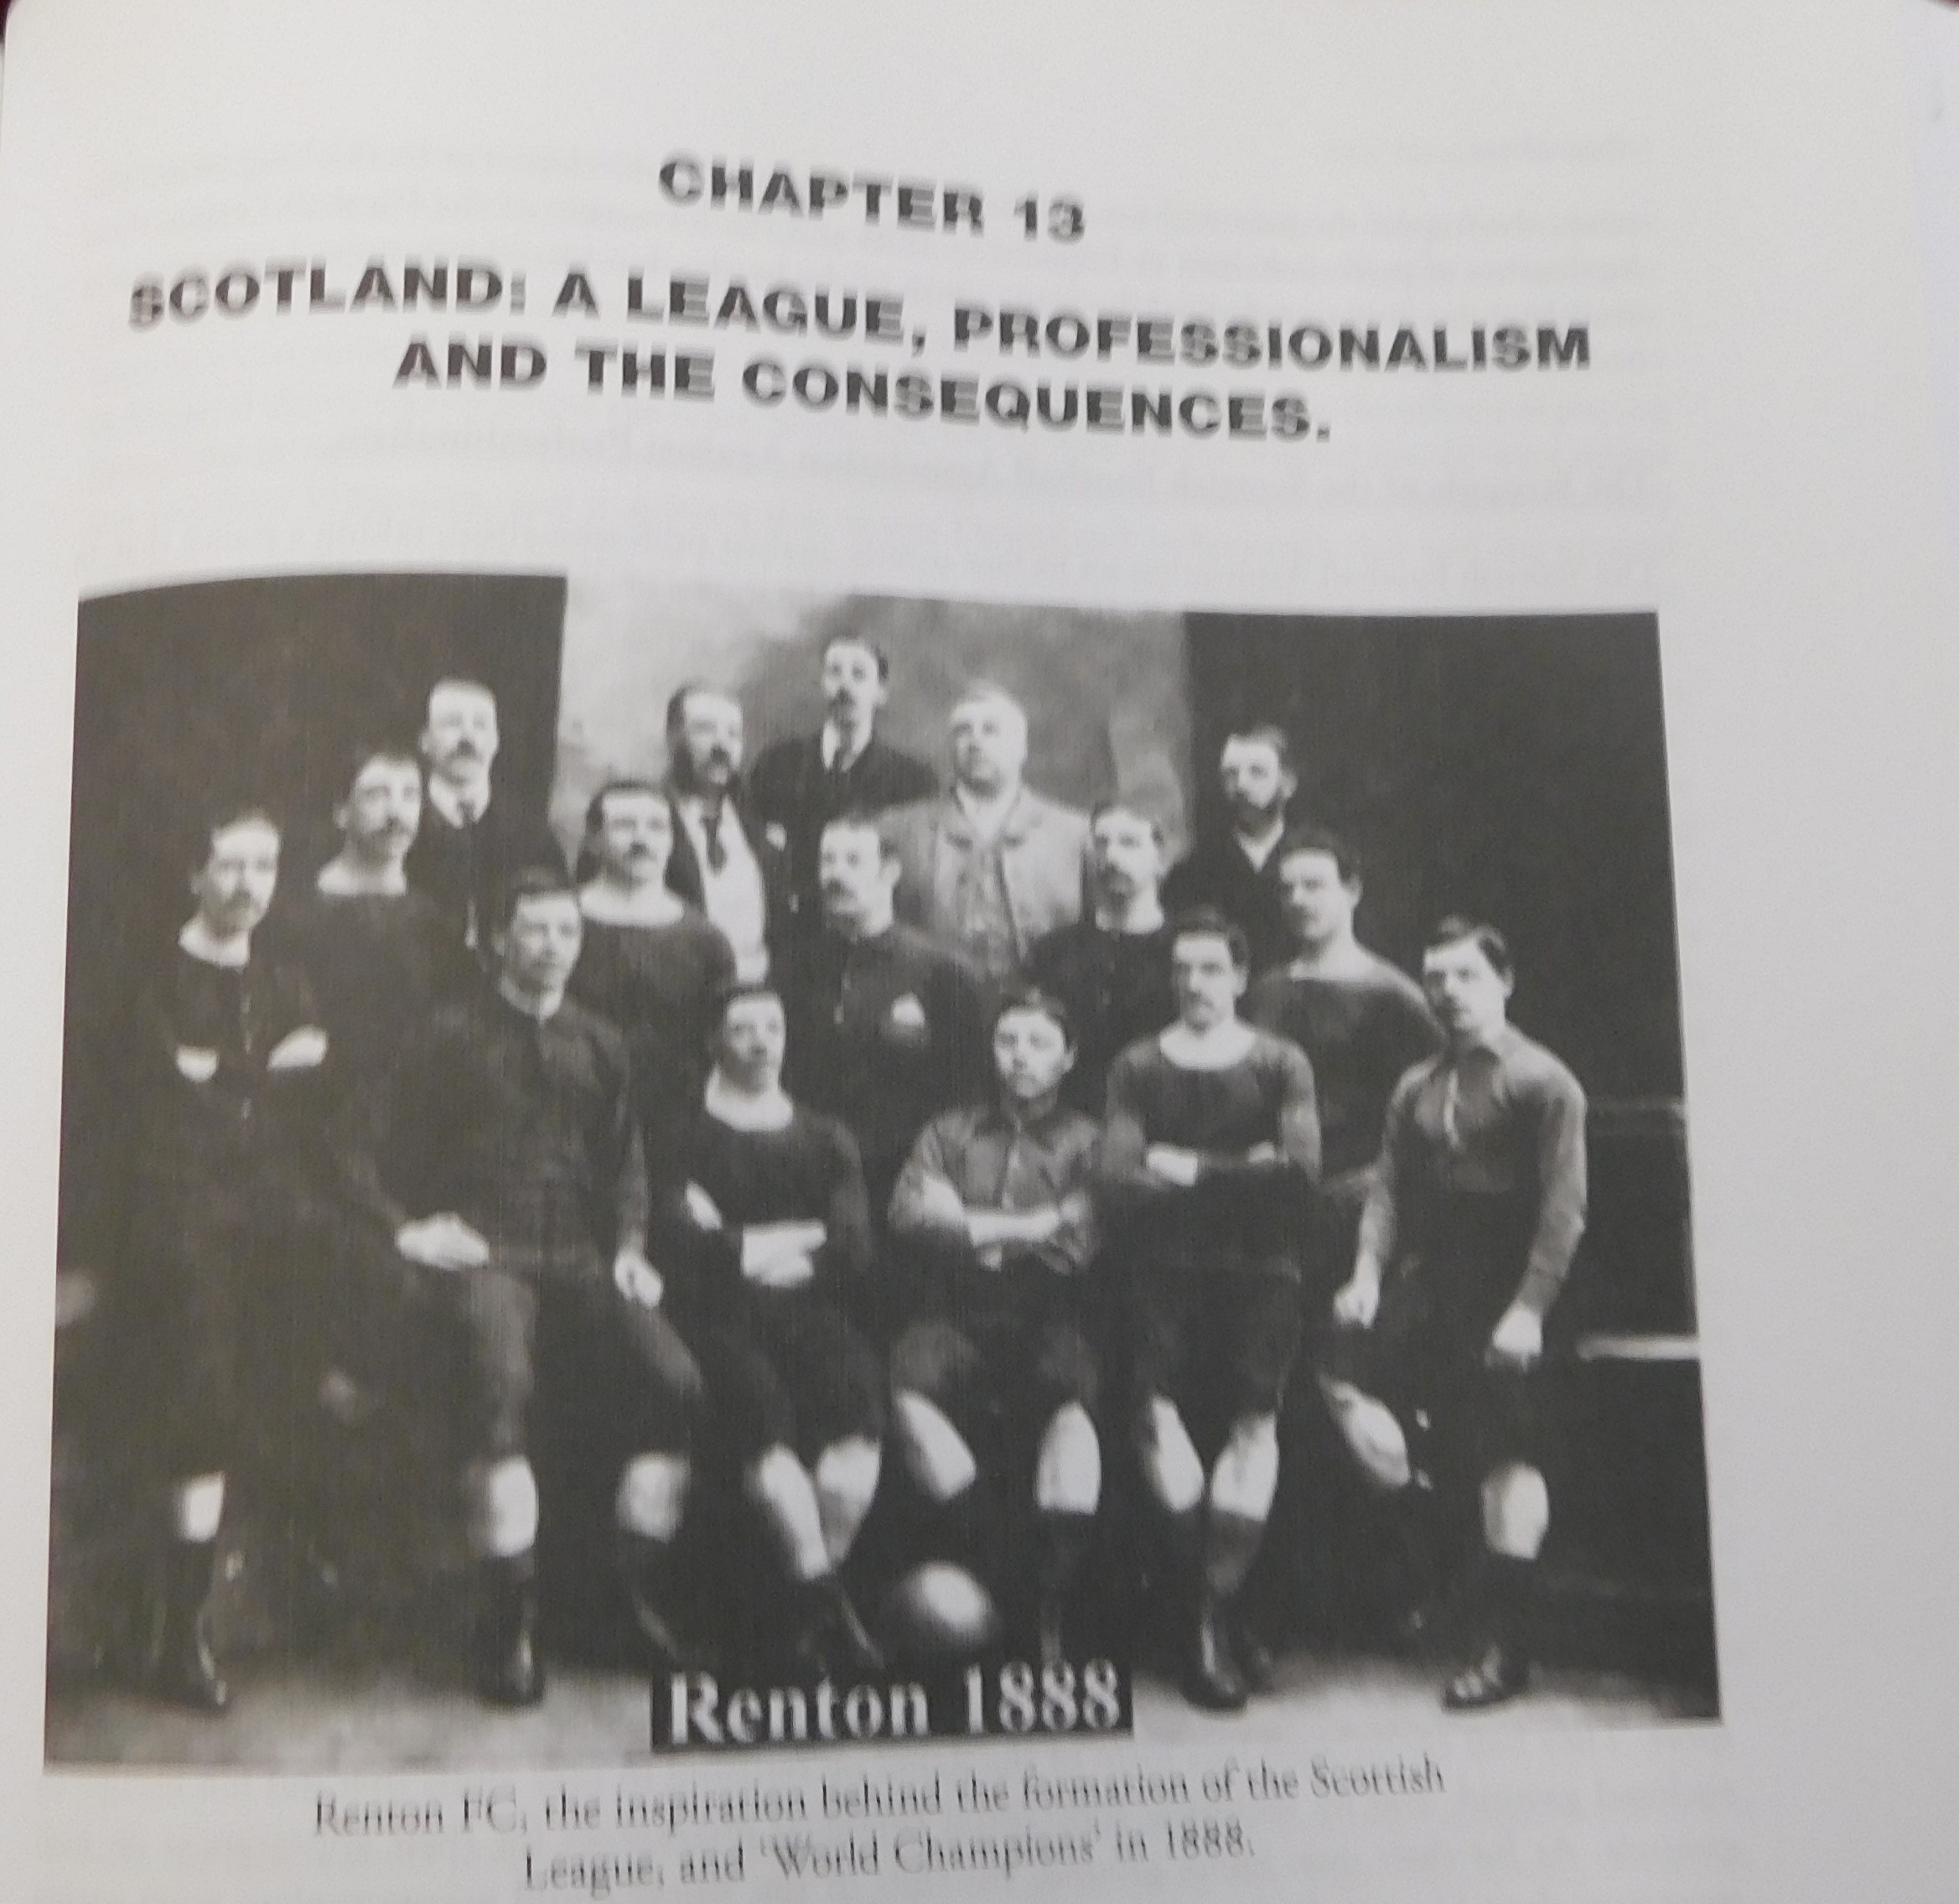 Football - 'Vain Games of No Value?' - A social history of Association Football in Britain' dating - Image 4 of 4